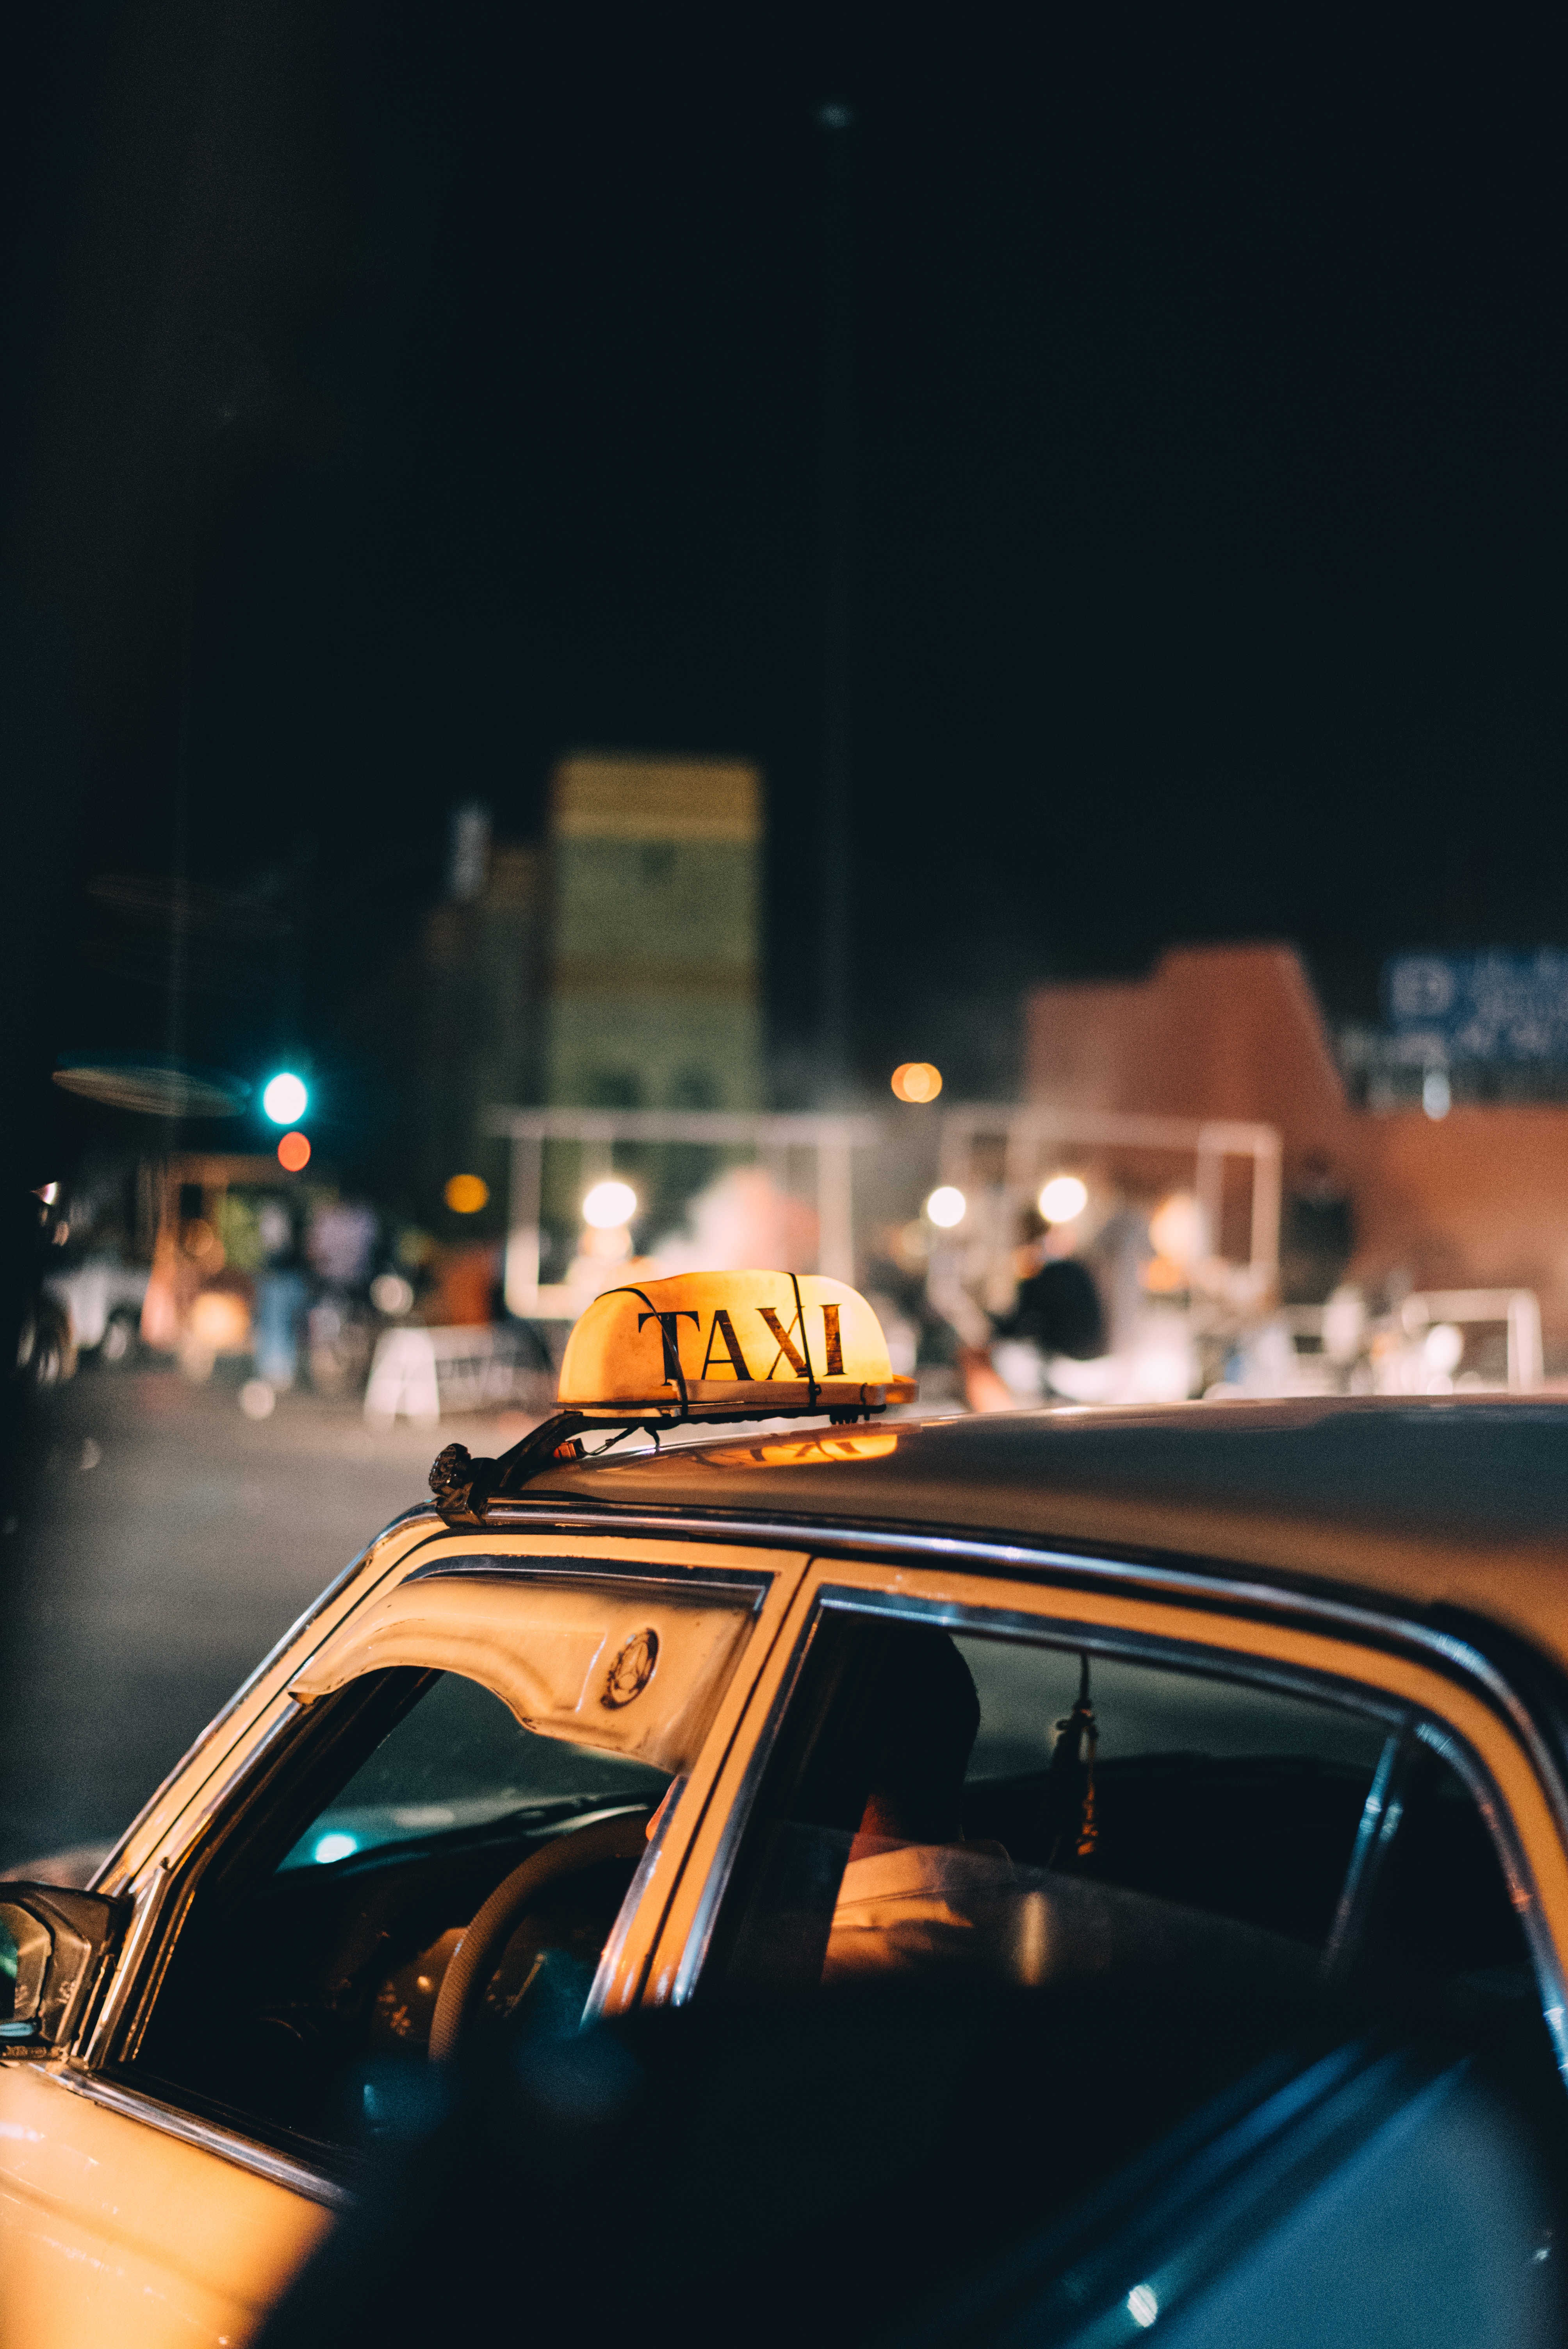 Popular Taxi Image for Phone